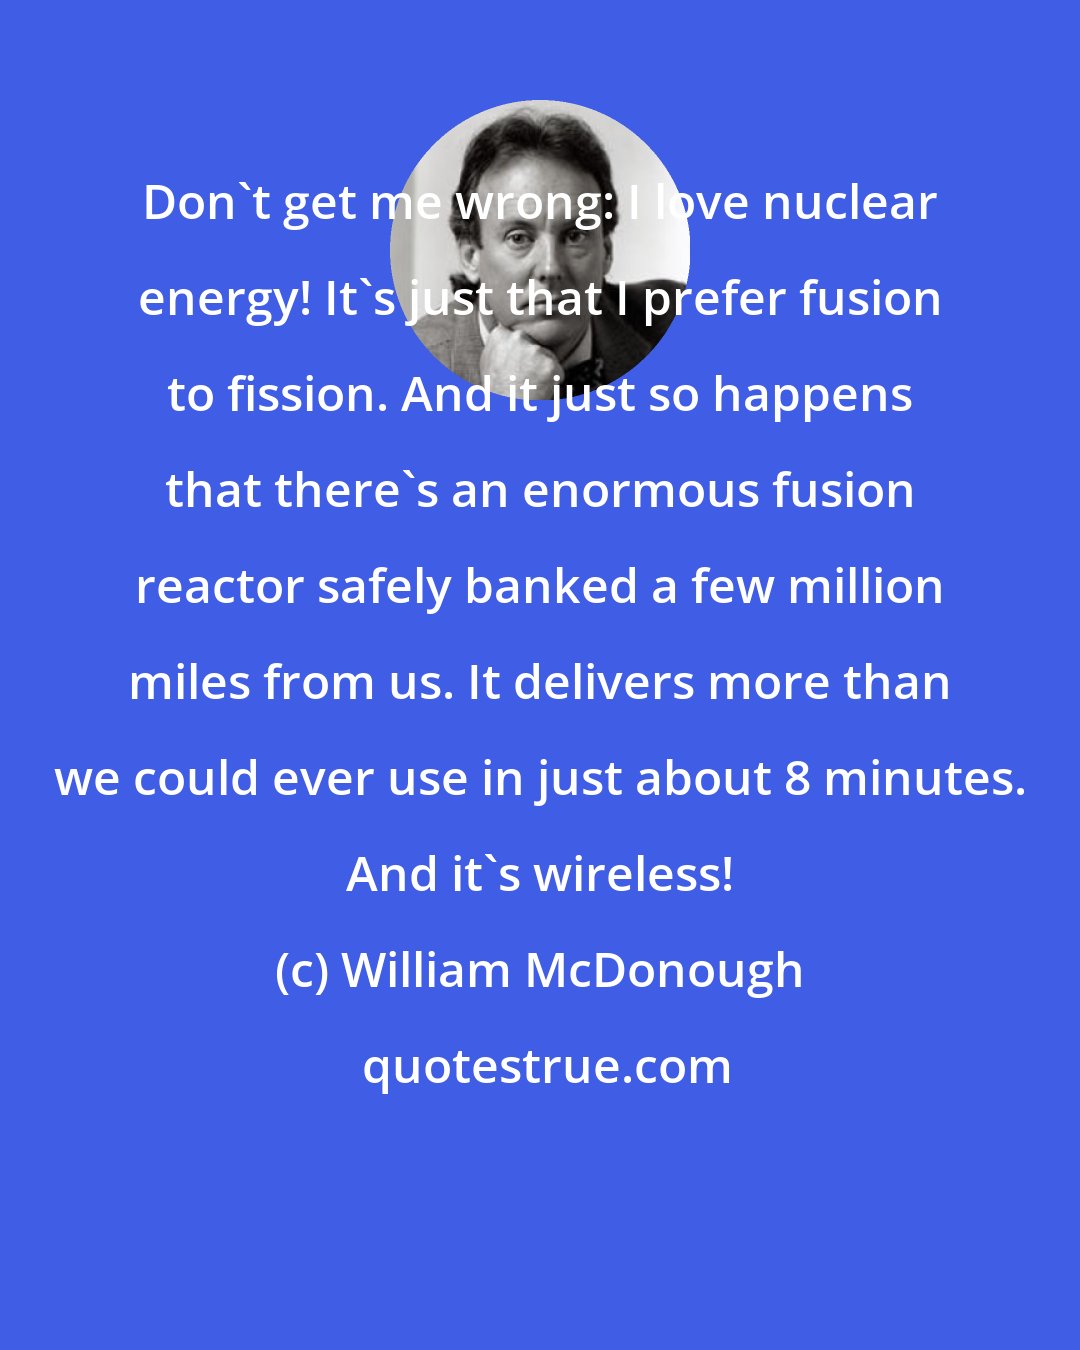 William McDonough: Don't get me wrong: I love nuclear energy! It's just that I prefer fusion to fission. And it just so happens that there's an enormous fusion reactor safely banked a few million miles from us. It delivers more than we could ever use in just about 8 minutes. And it's wireless!